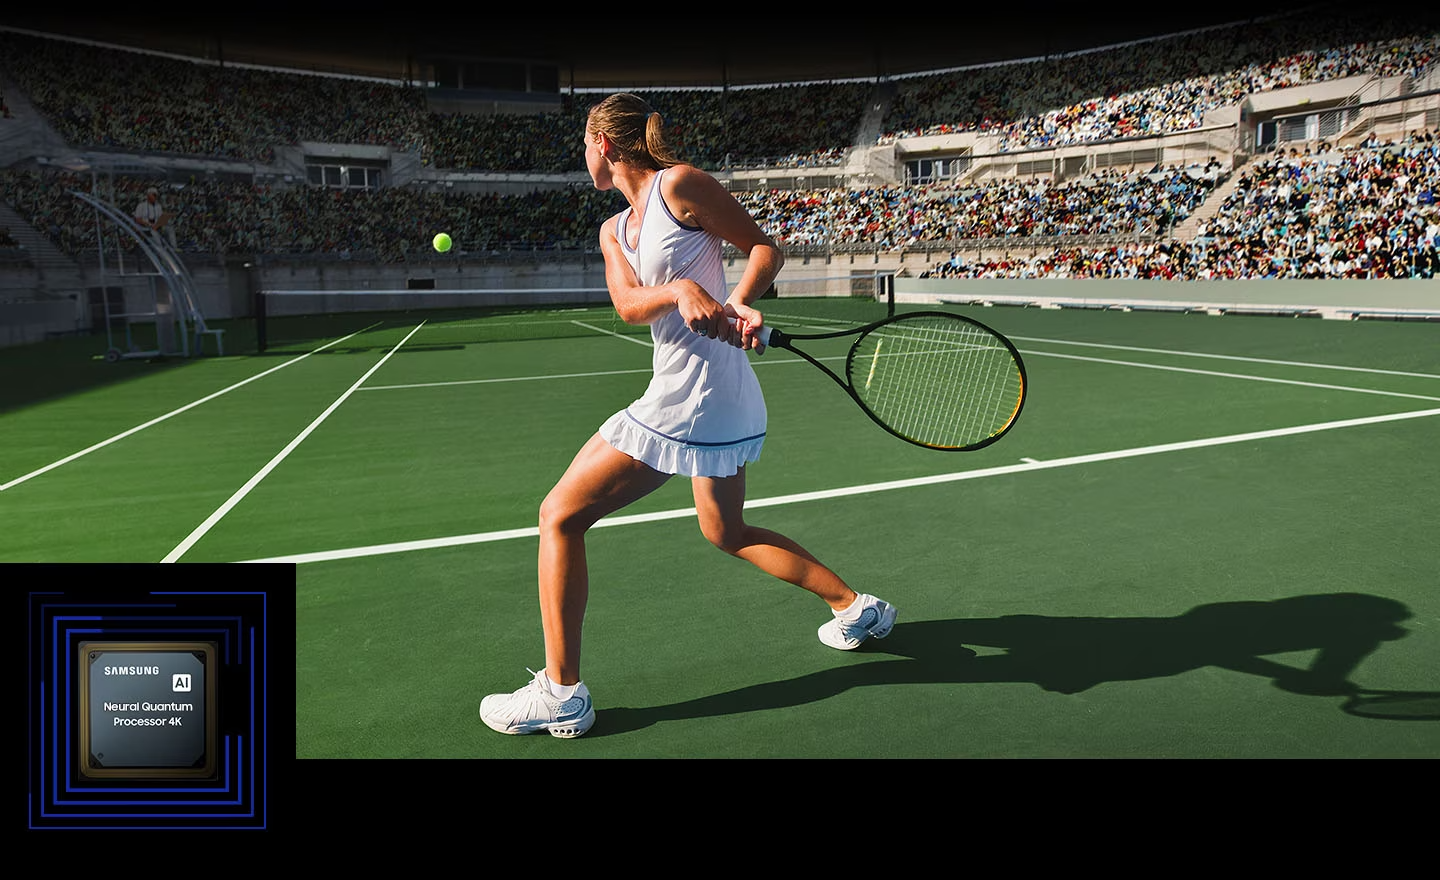 Description: A woman is playing tennis in front of a large crowd. The Neural Quantum Processor 4K processes the many objects on display and enhances the entire scene. Neural Quantum Processor 4K is on display in the lower lefthand corner.